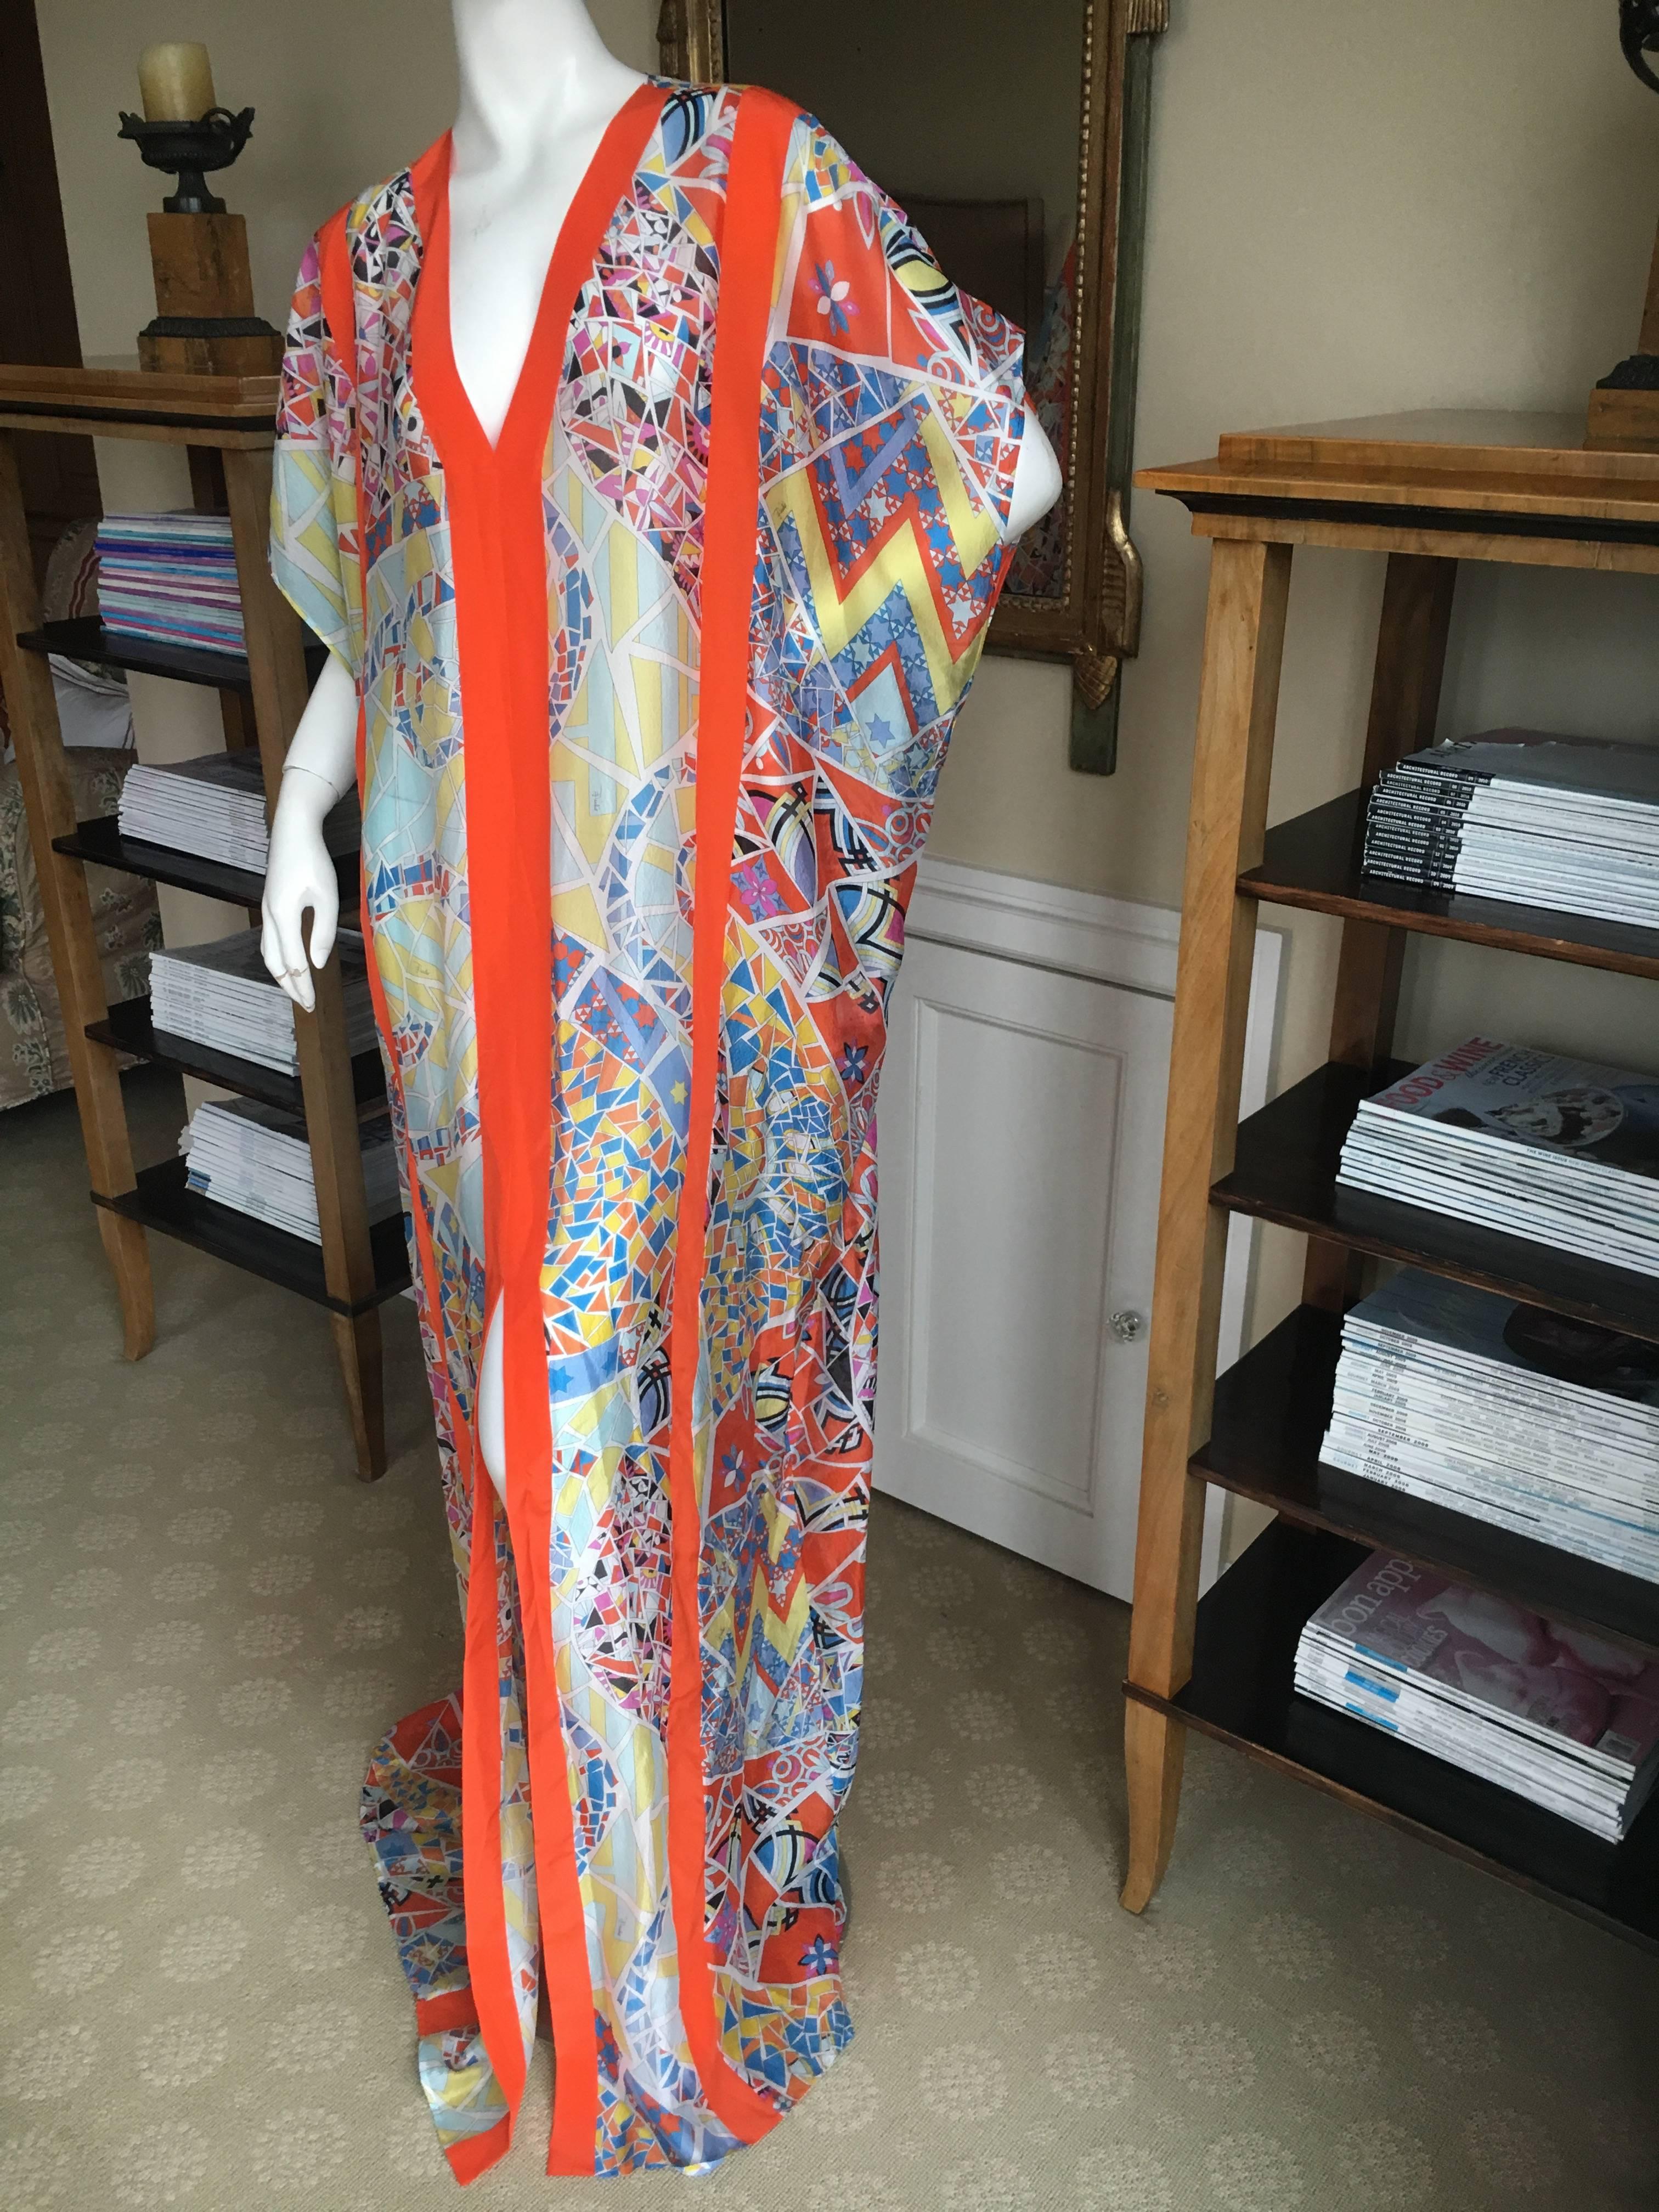 Brilliant kaleidoscope pattern sheer silk caftan from Emilio Pucci.
This is a large size with a very long 70+ hemline
Bust 66